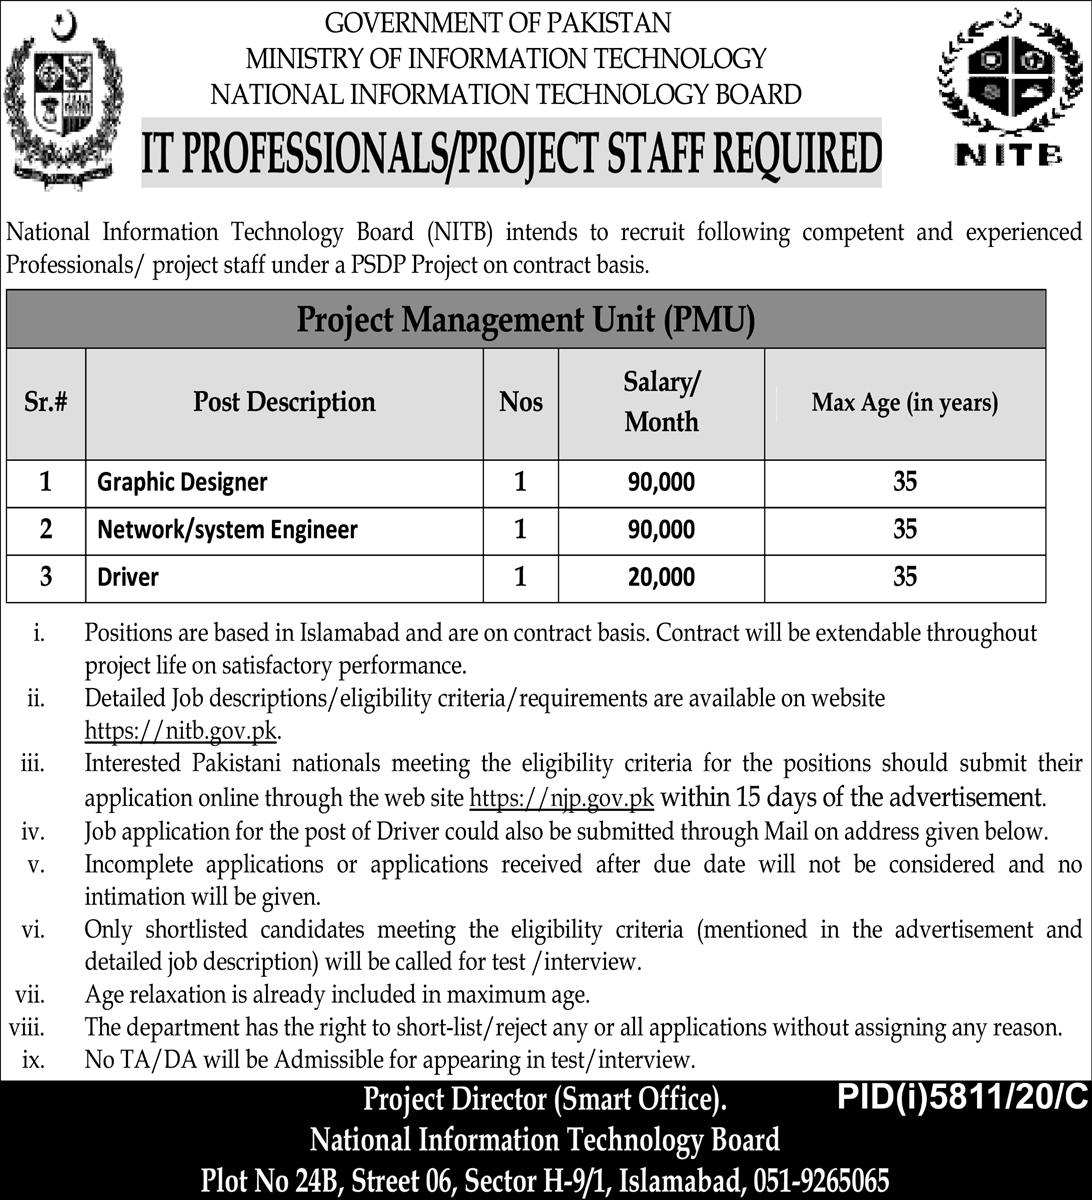 Ministry of Information Technology Jobs 2021 National Information Technology Board